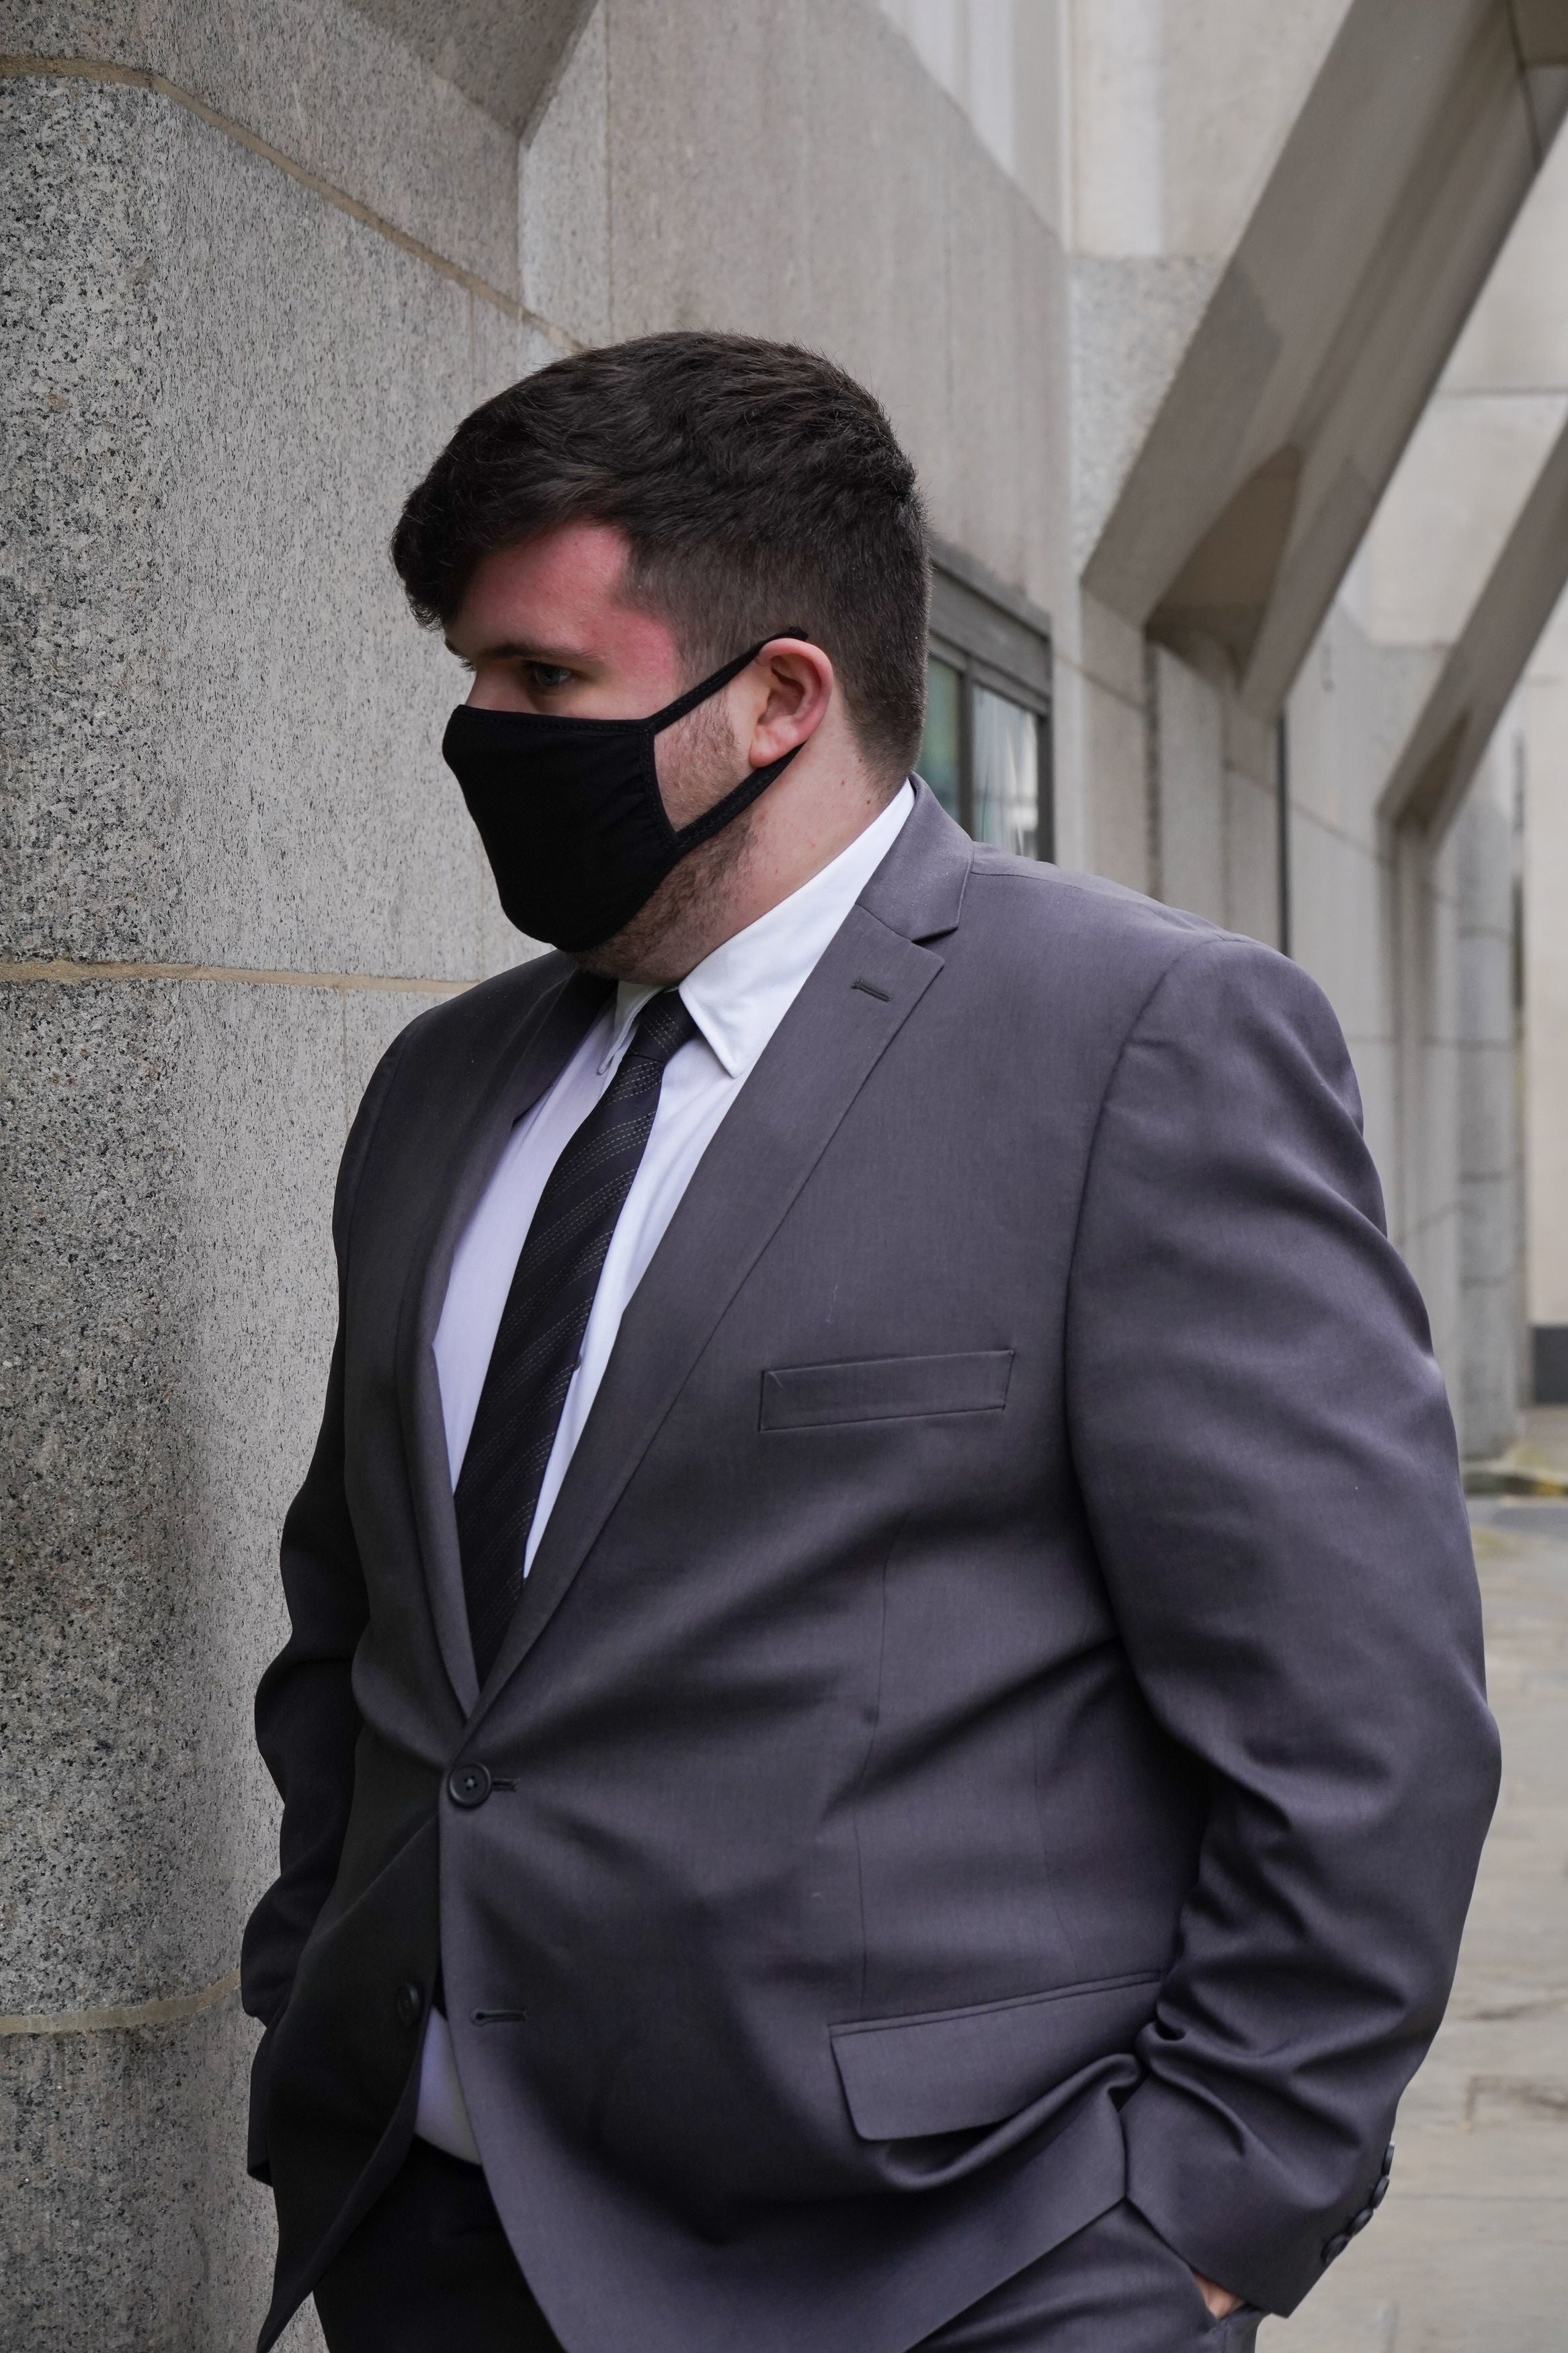 Jacob Crimi-Appleby previously arriving at the Old Bailey in central London, where he pleaded guilty to causing grievous bodily harm with intent to Marius Gustavson in February 2019 qhiqqxiuziqhinv